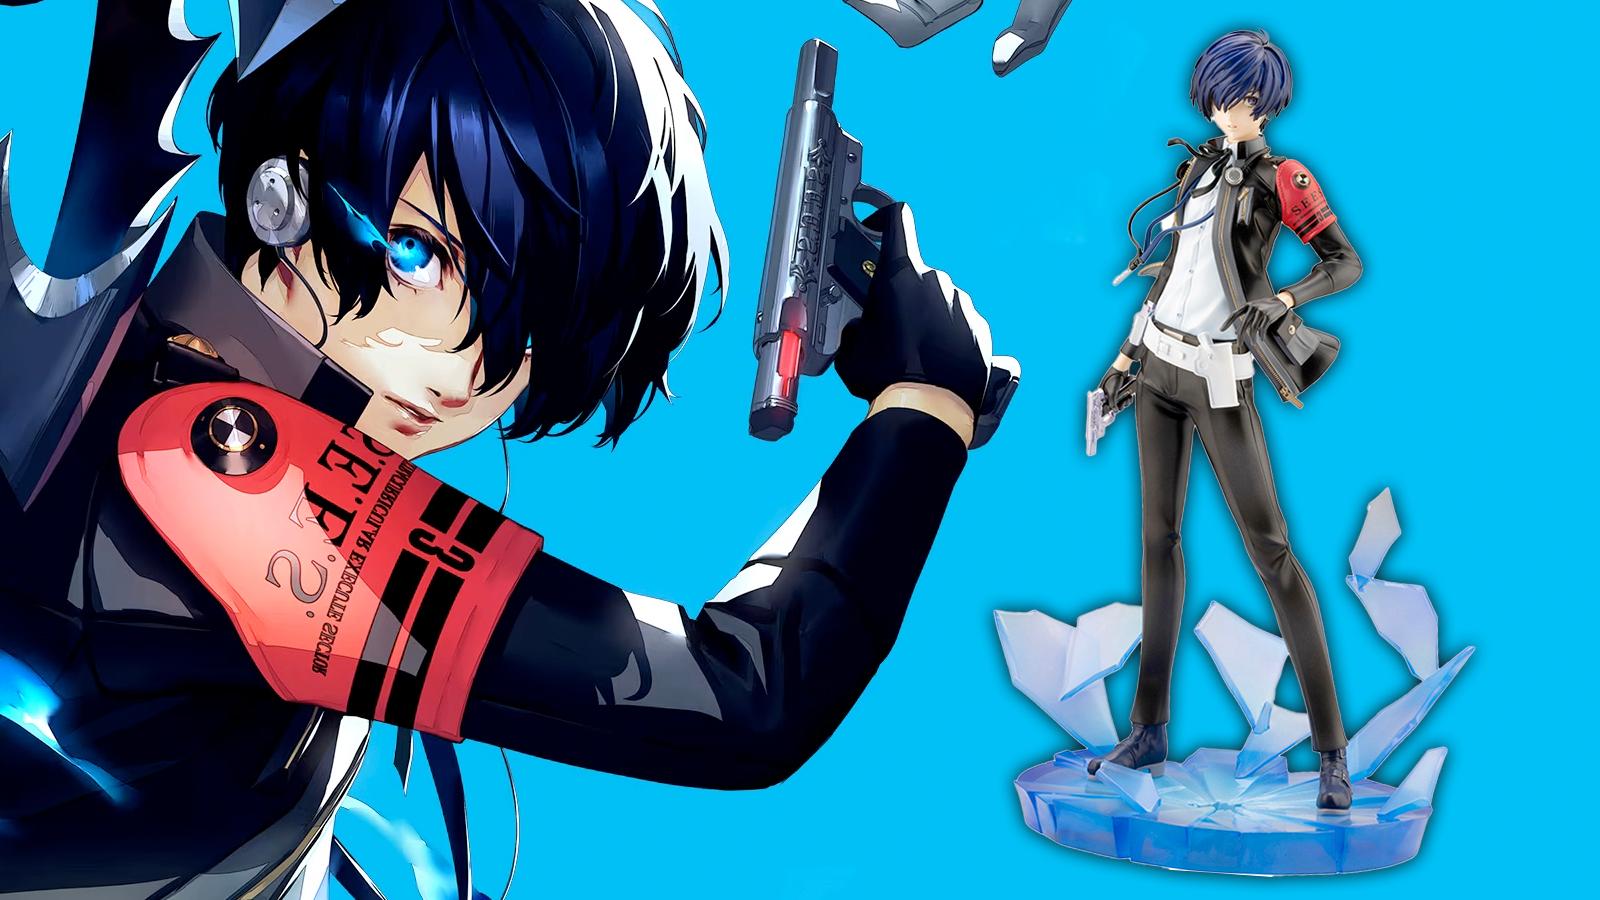 persona 3 reloaded statue with key art next to it for comparison